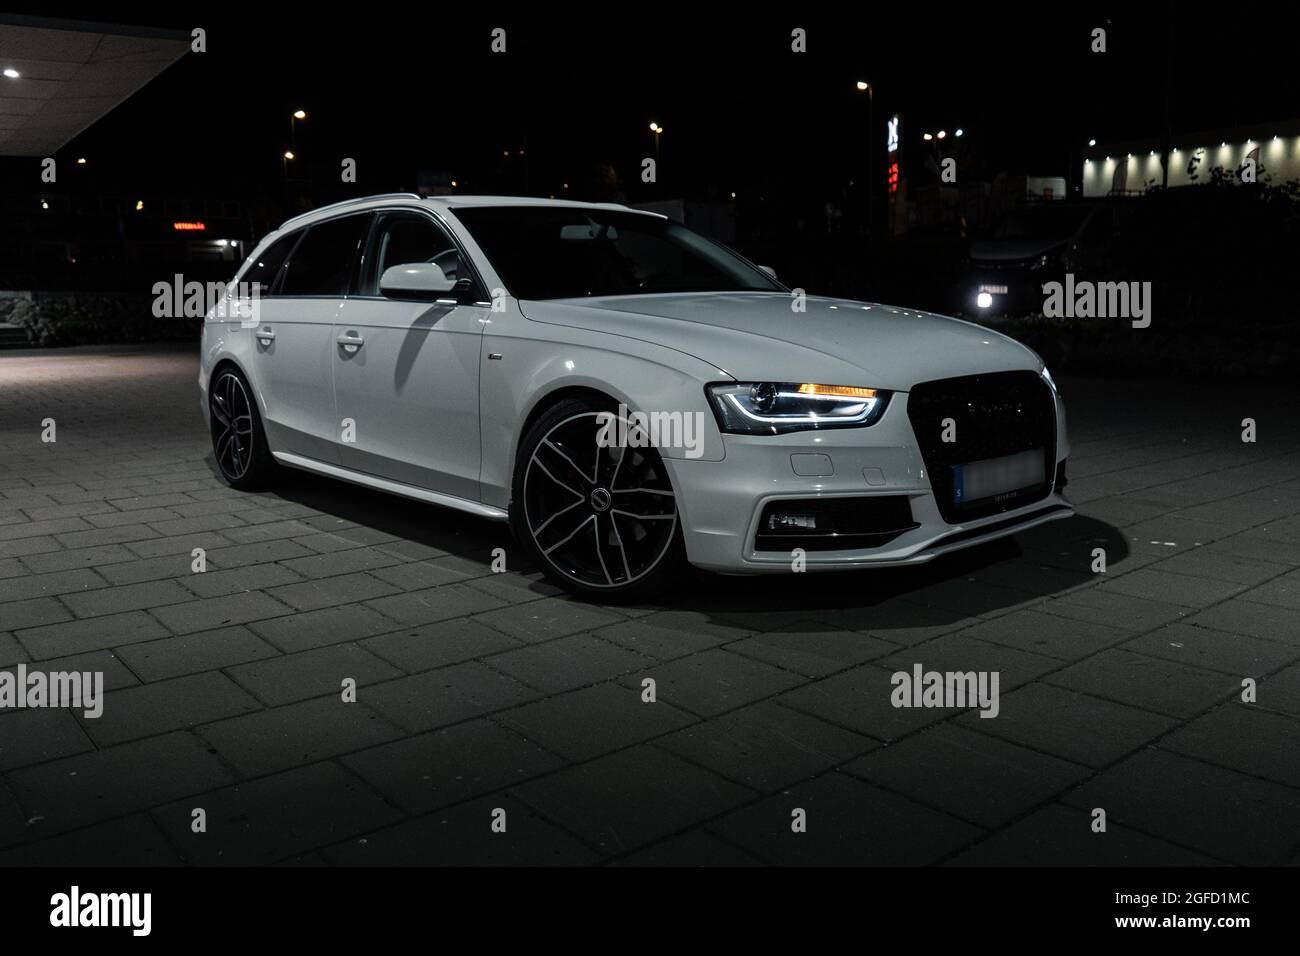 ULRICEHAMN, SWEDEN - Aug 04, 2021: The front part of white Audi A4 Avant with lit headlights outdoors at night Stock Photo